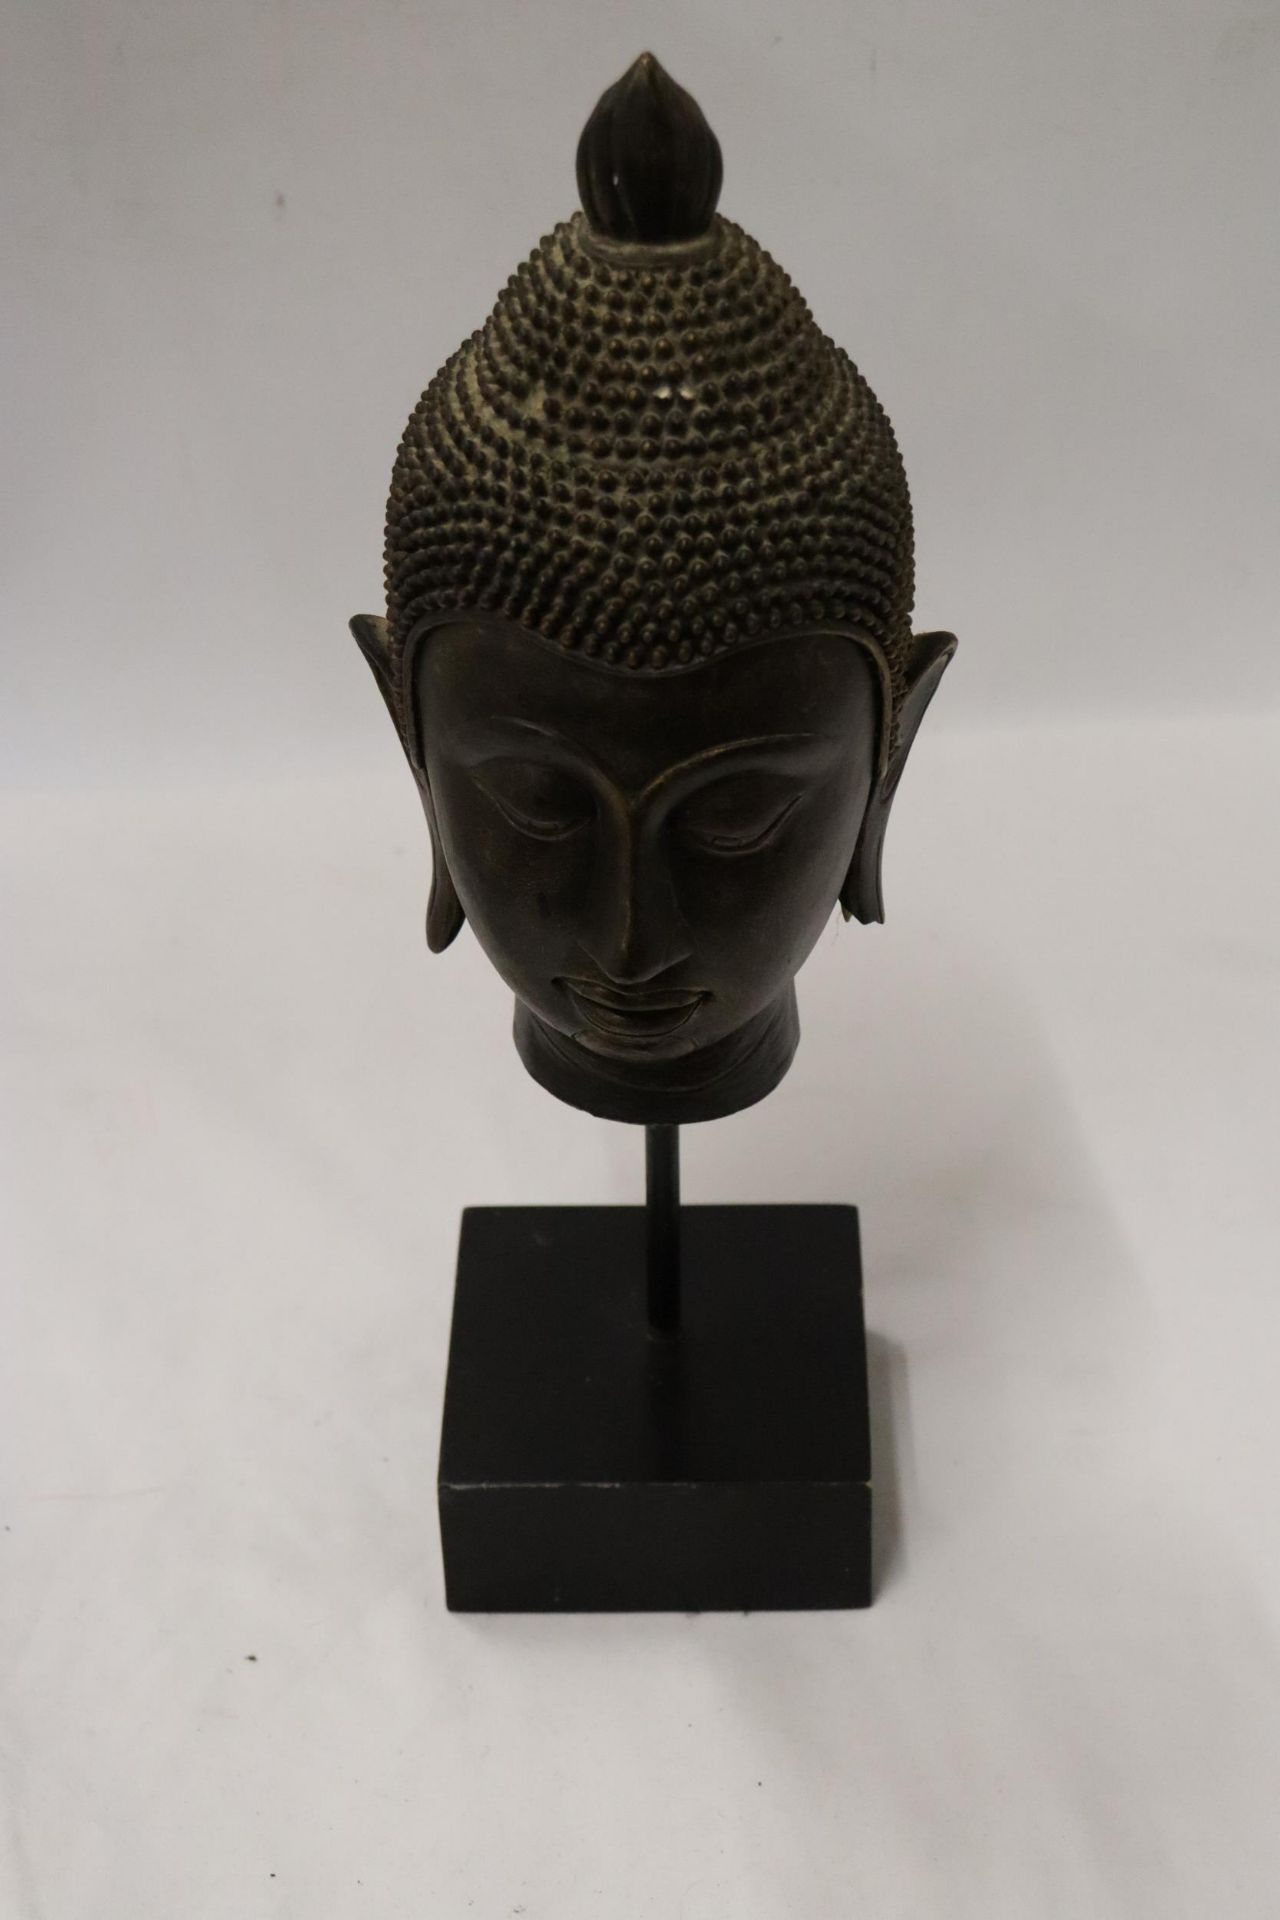 A BUDDAH'S HEAD ON A STAND, HEIGHT 36CM - Image 2 of 5